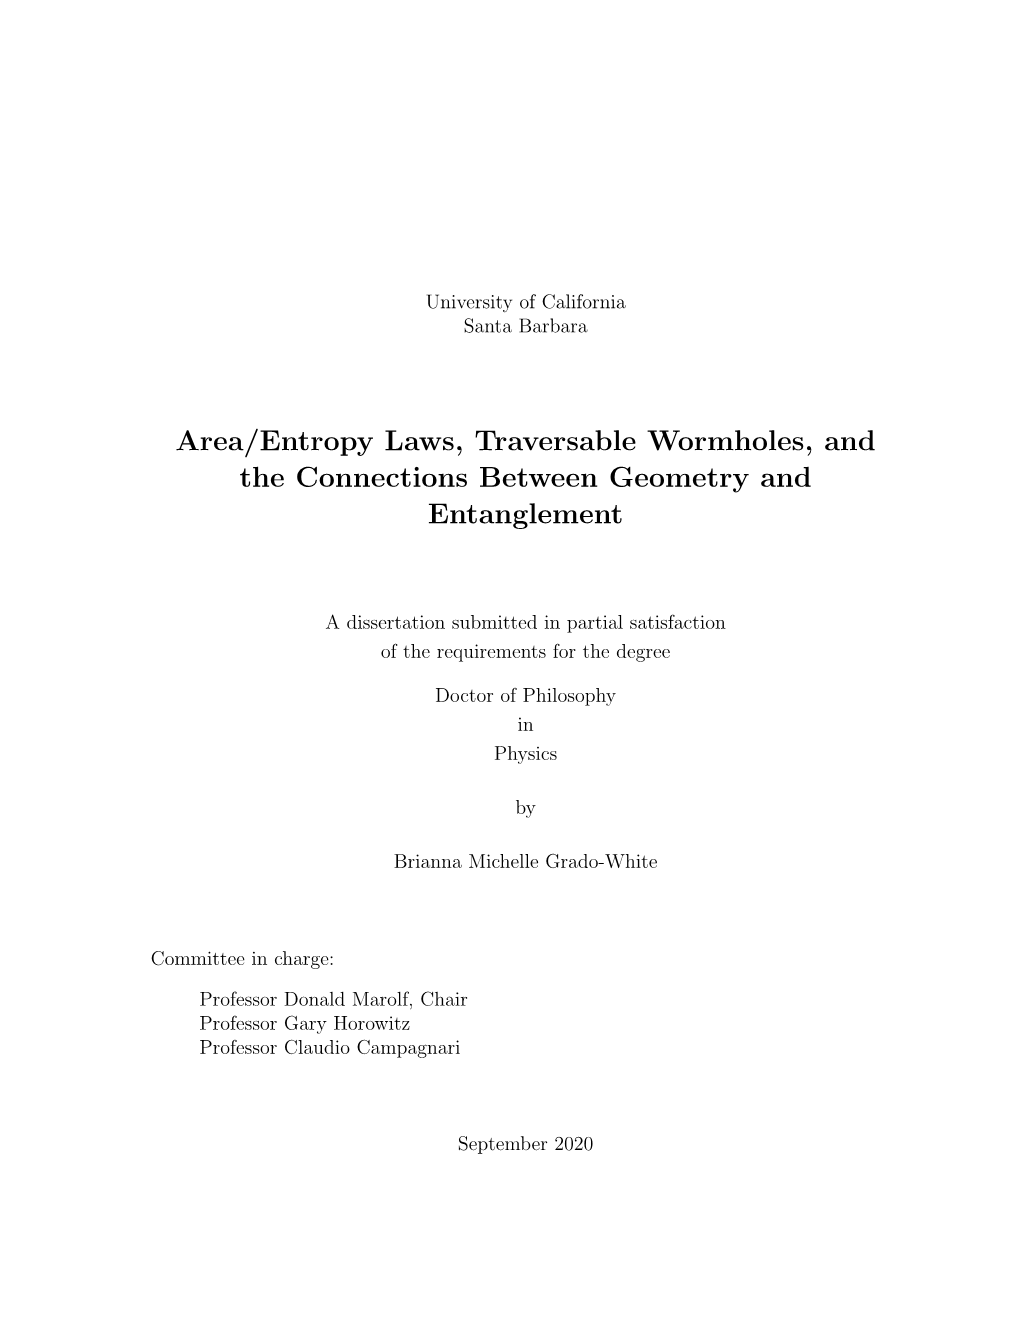 Area/Entropy Laws, Traversable Wormholes, and the Connections Between Geometry and Entanglement